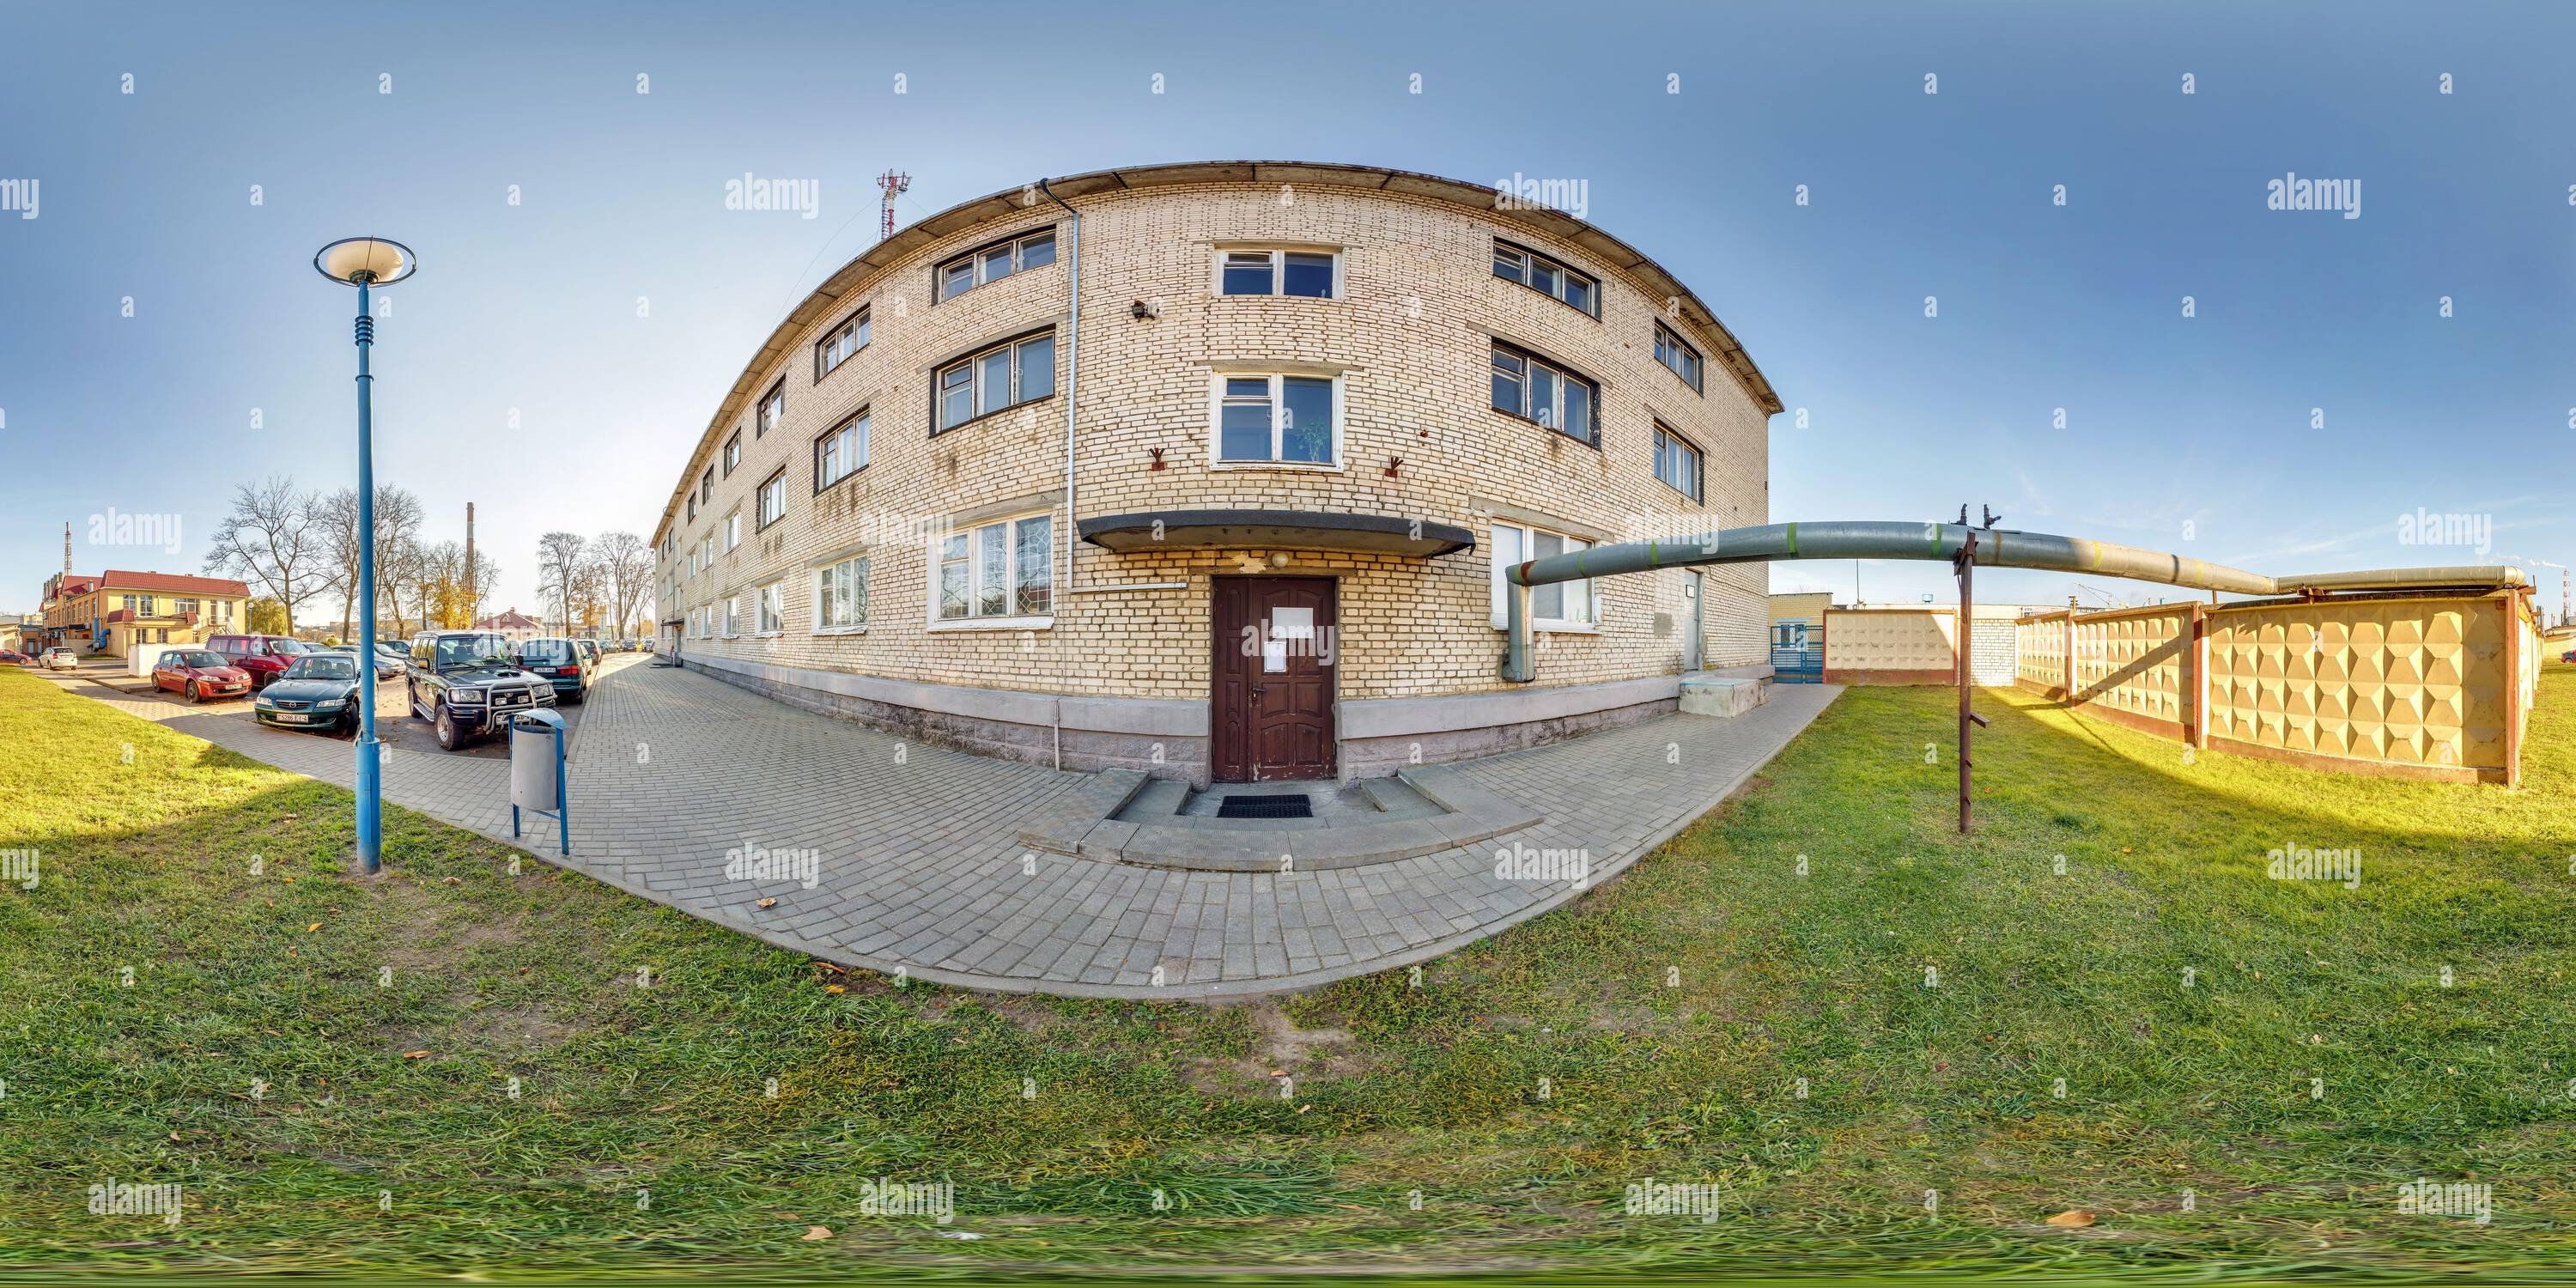 360 degree panoramic view of GRODNO, BELARUS - JULY 2021: full seamless spherical hdri panorama 360 view on crossroads street near multistory building area of urban development in